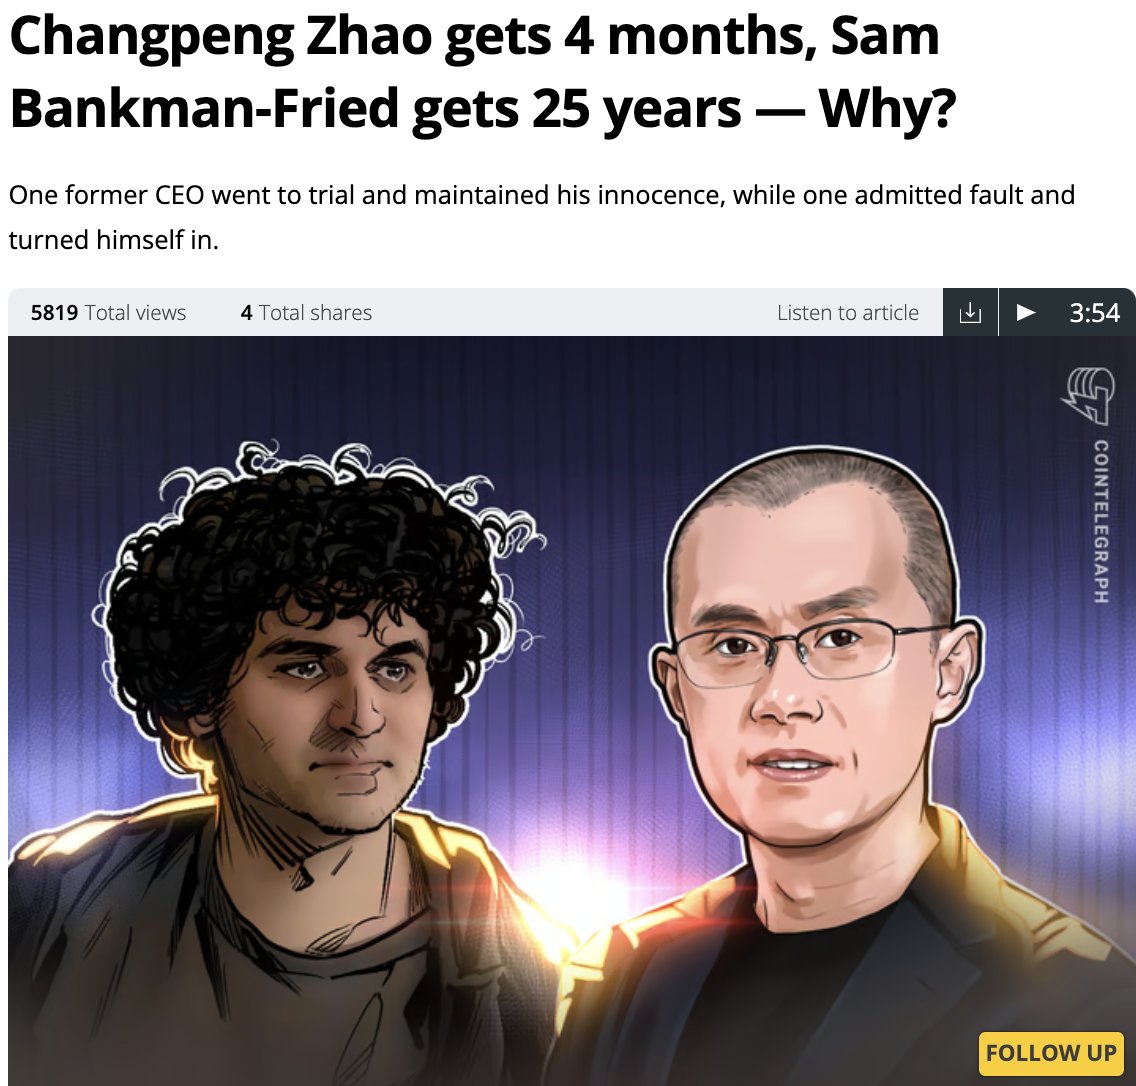 ⚖️🔒 CoinTelegraph reports on the sentences of Changpeng Zhao and Sam Bankman-Fried.

Read more: cointelegraph.com/news/changpeng…

#ChangpengZhao #SamBankmanFried #LegalProceedings #CryptocurrencyNews #FinanceLaw 📰